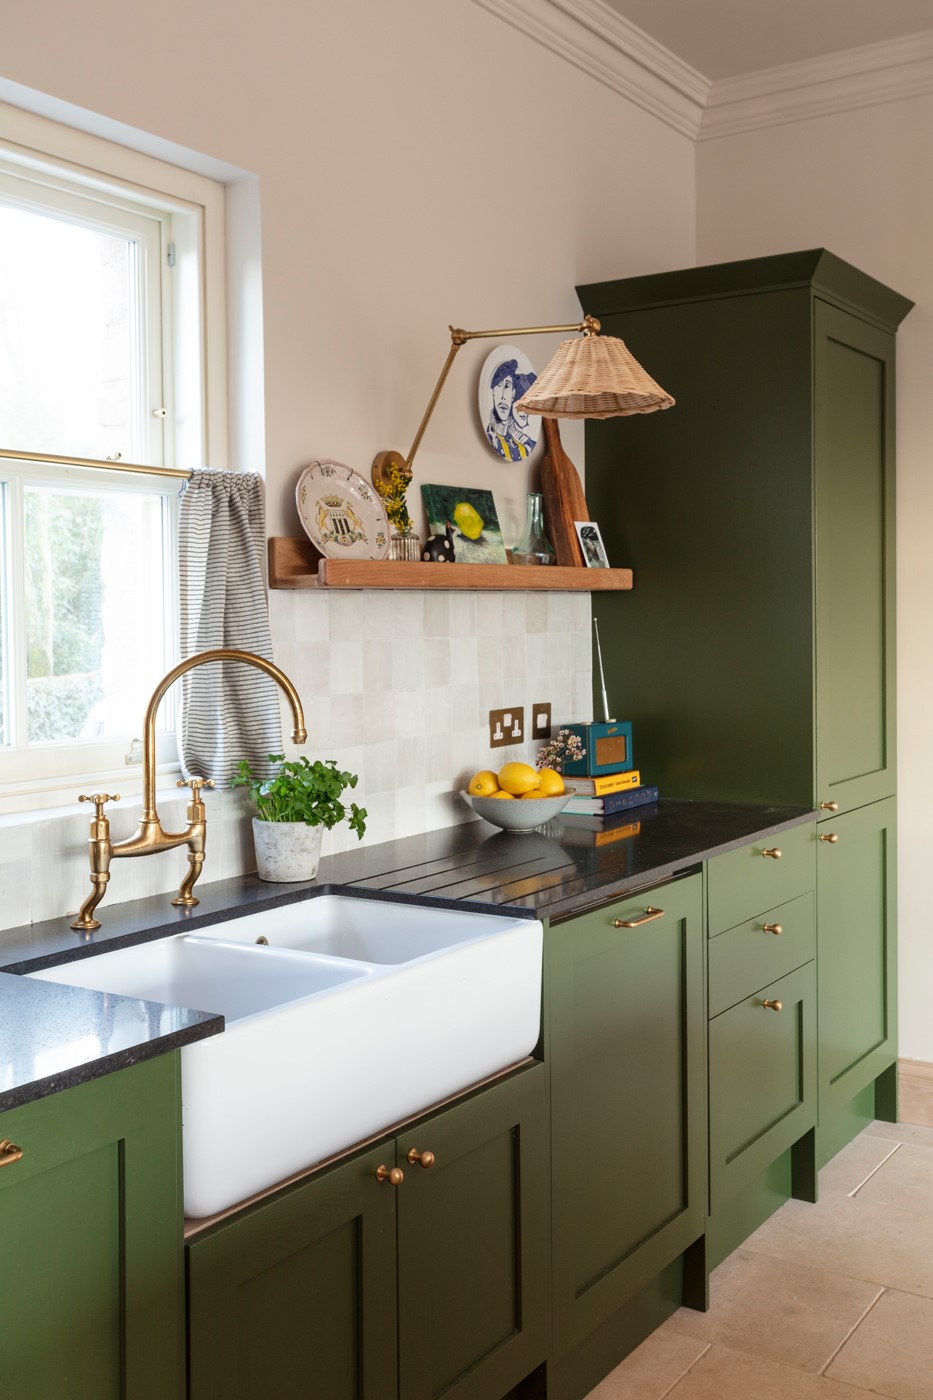 The Old Rectory - the bespoke kitchen in a pared-back shaker style, with Belfast sink